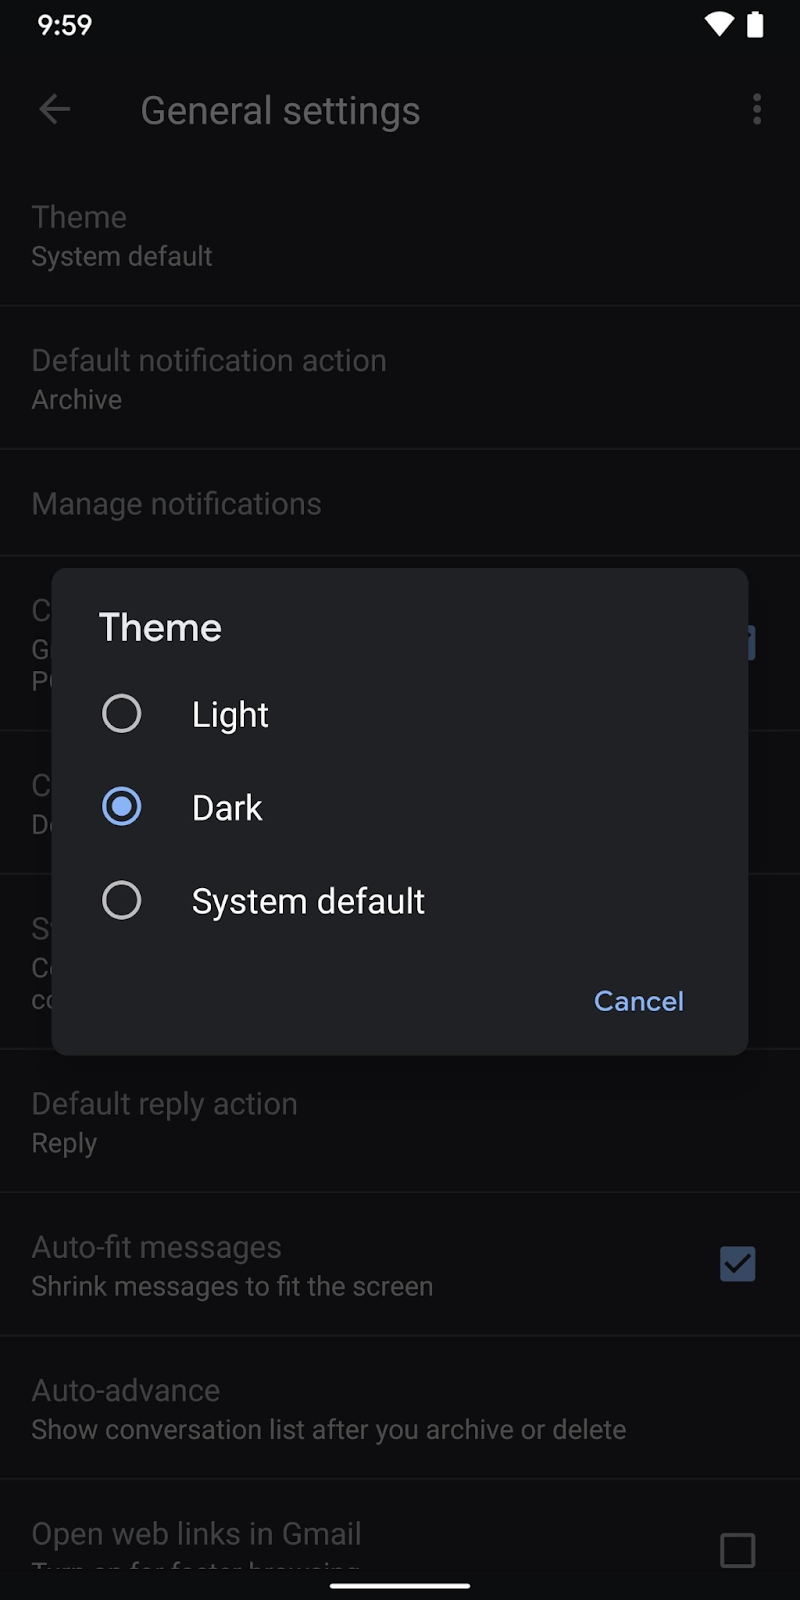 tap light theme to disable dark mode on Android phone